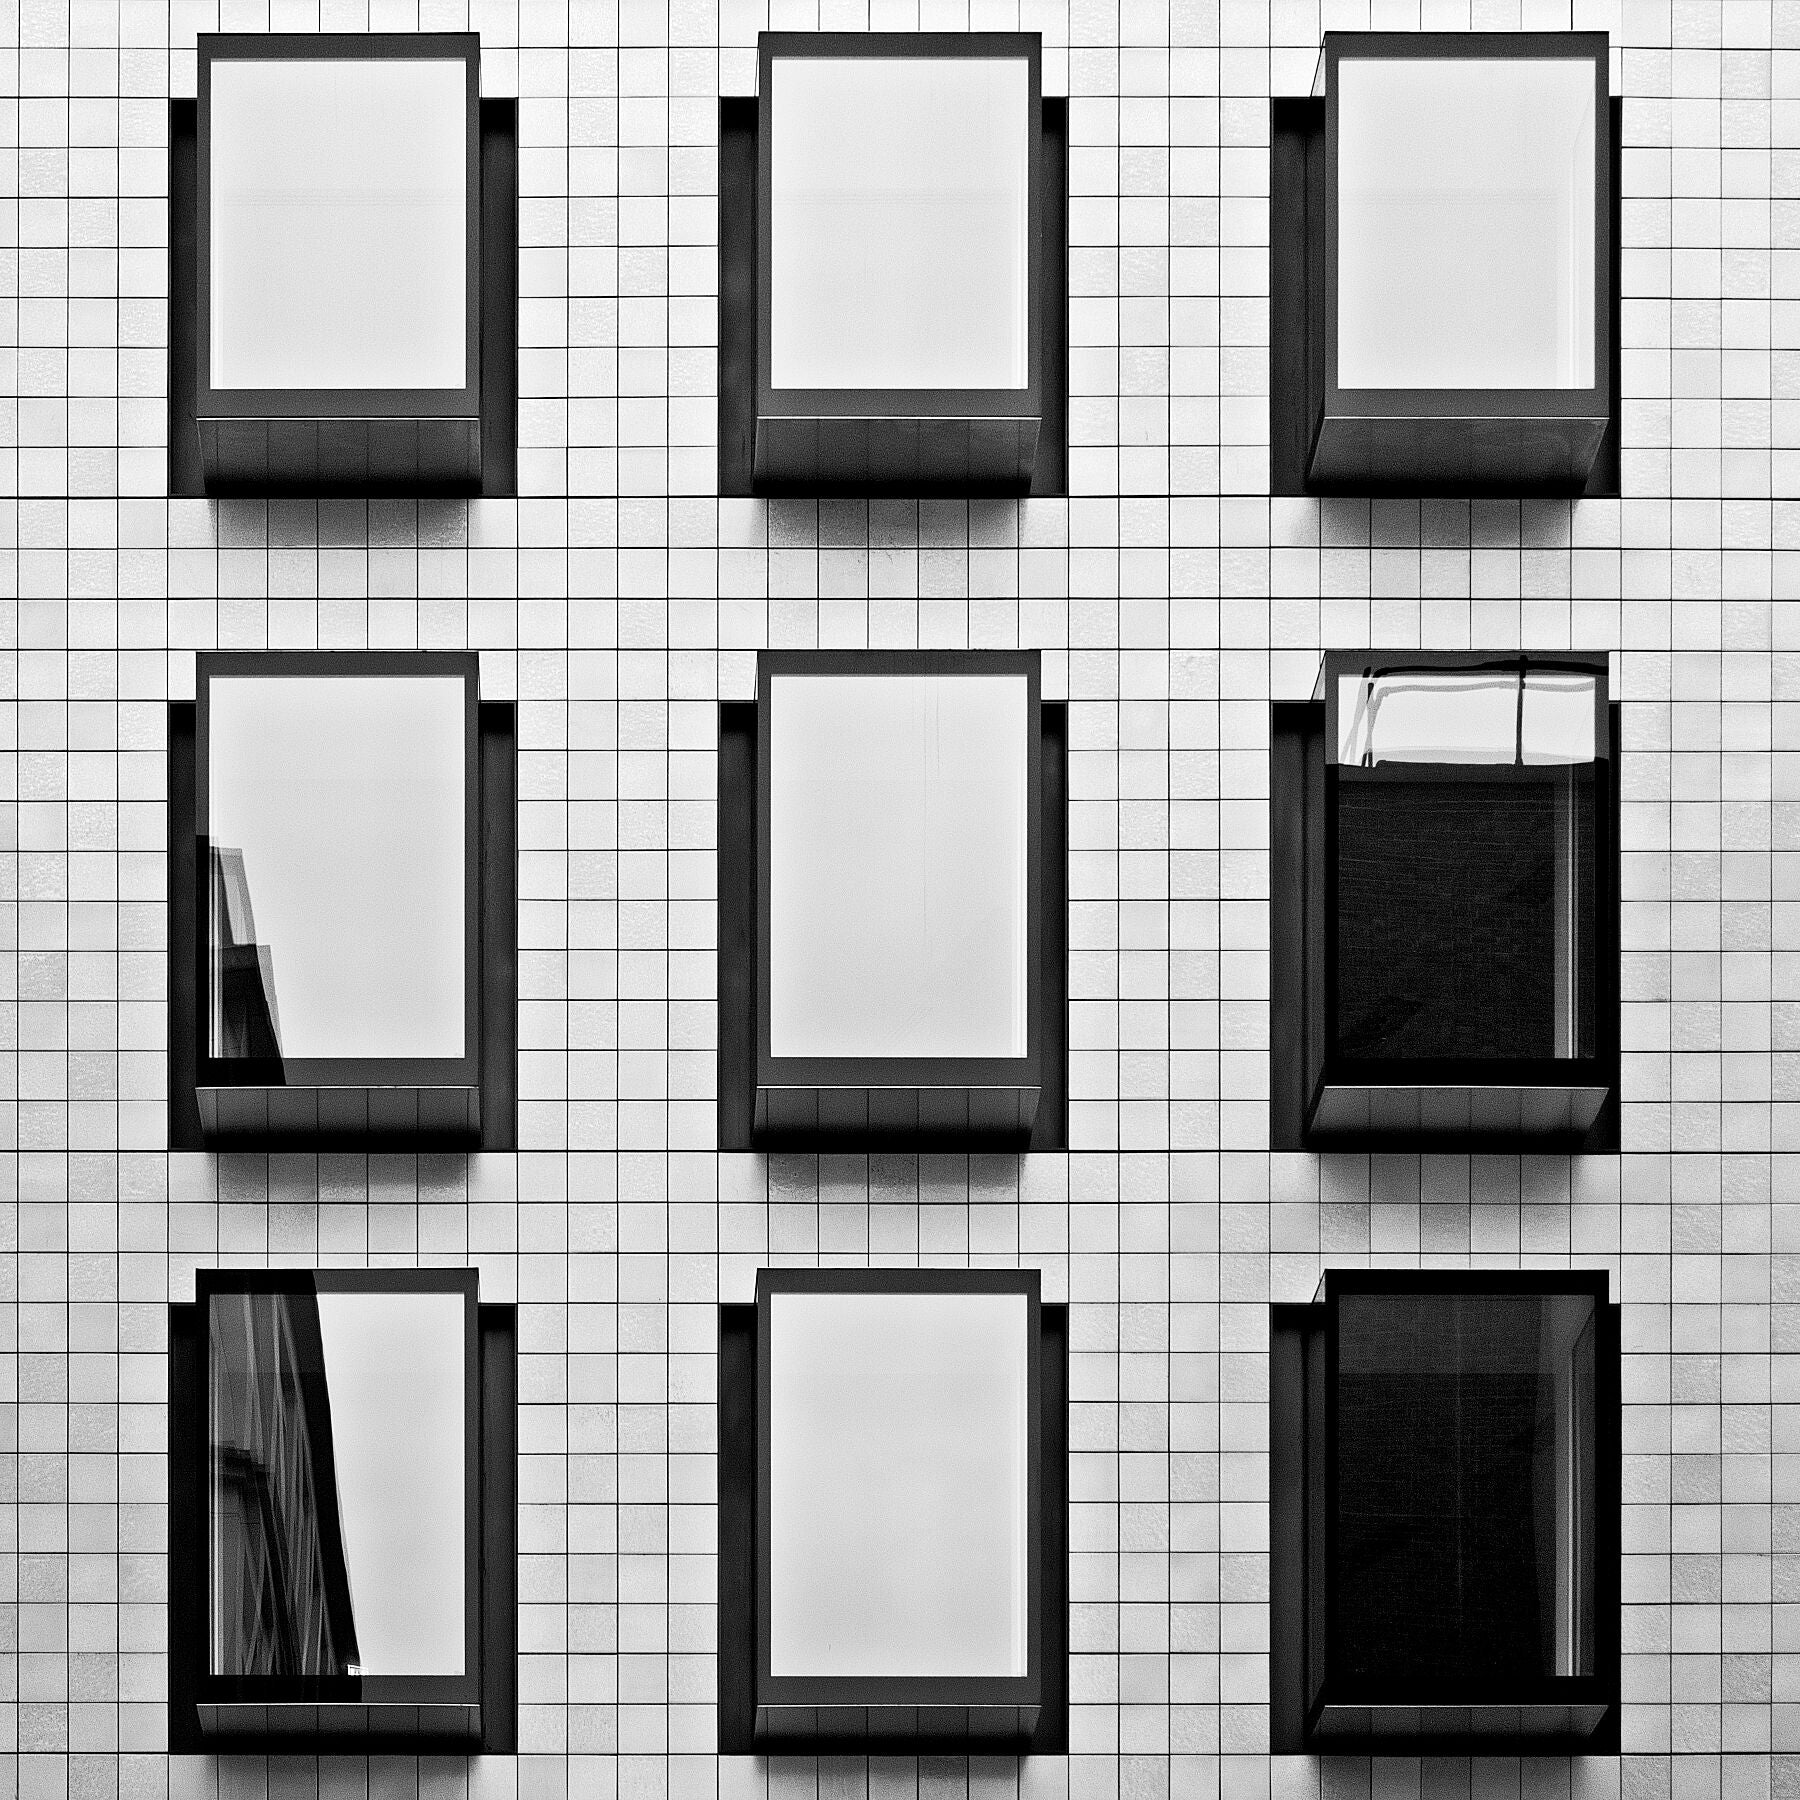 Black and white architectural photography. Abstract wall art